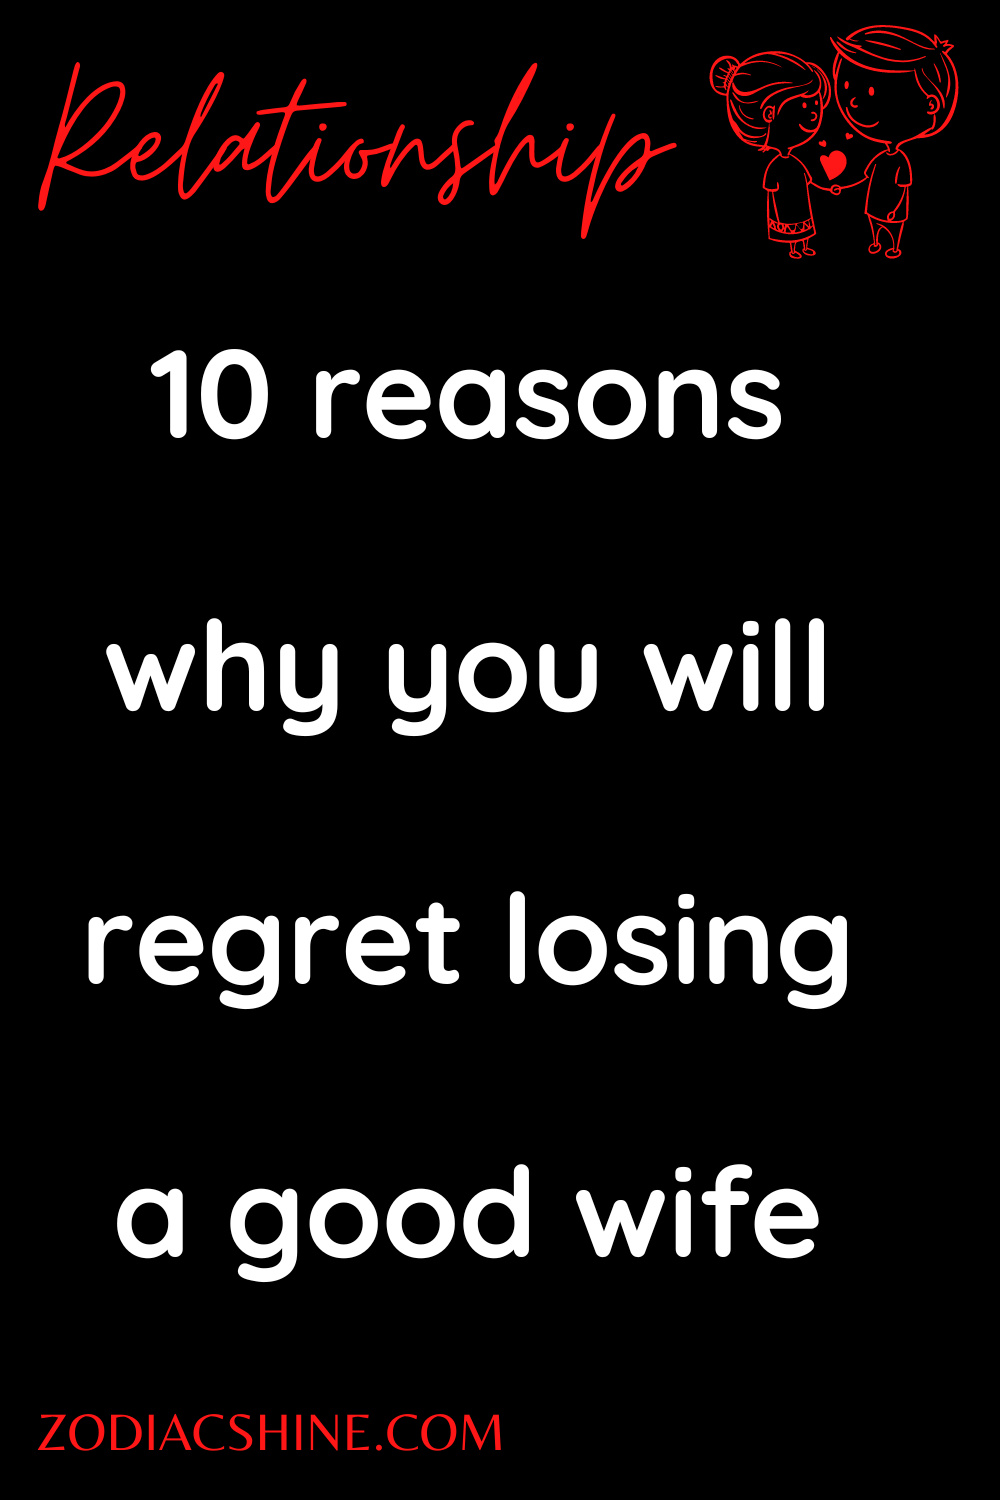 10 reasons why you will regret losing a good wife